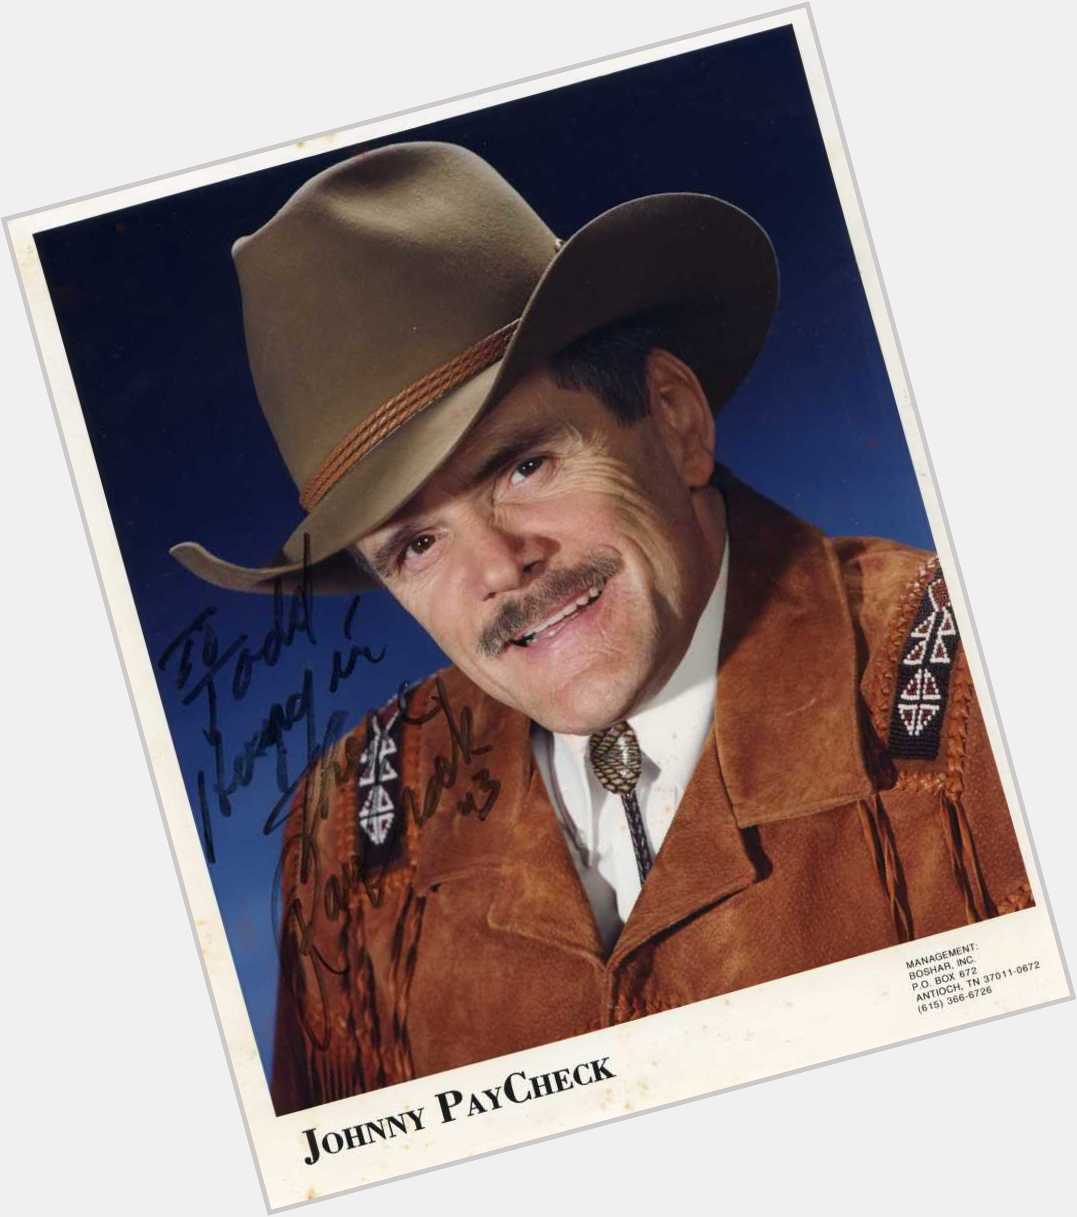 Happy Birthday Johnny Paycheck who would have been 79 today!  